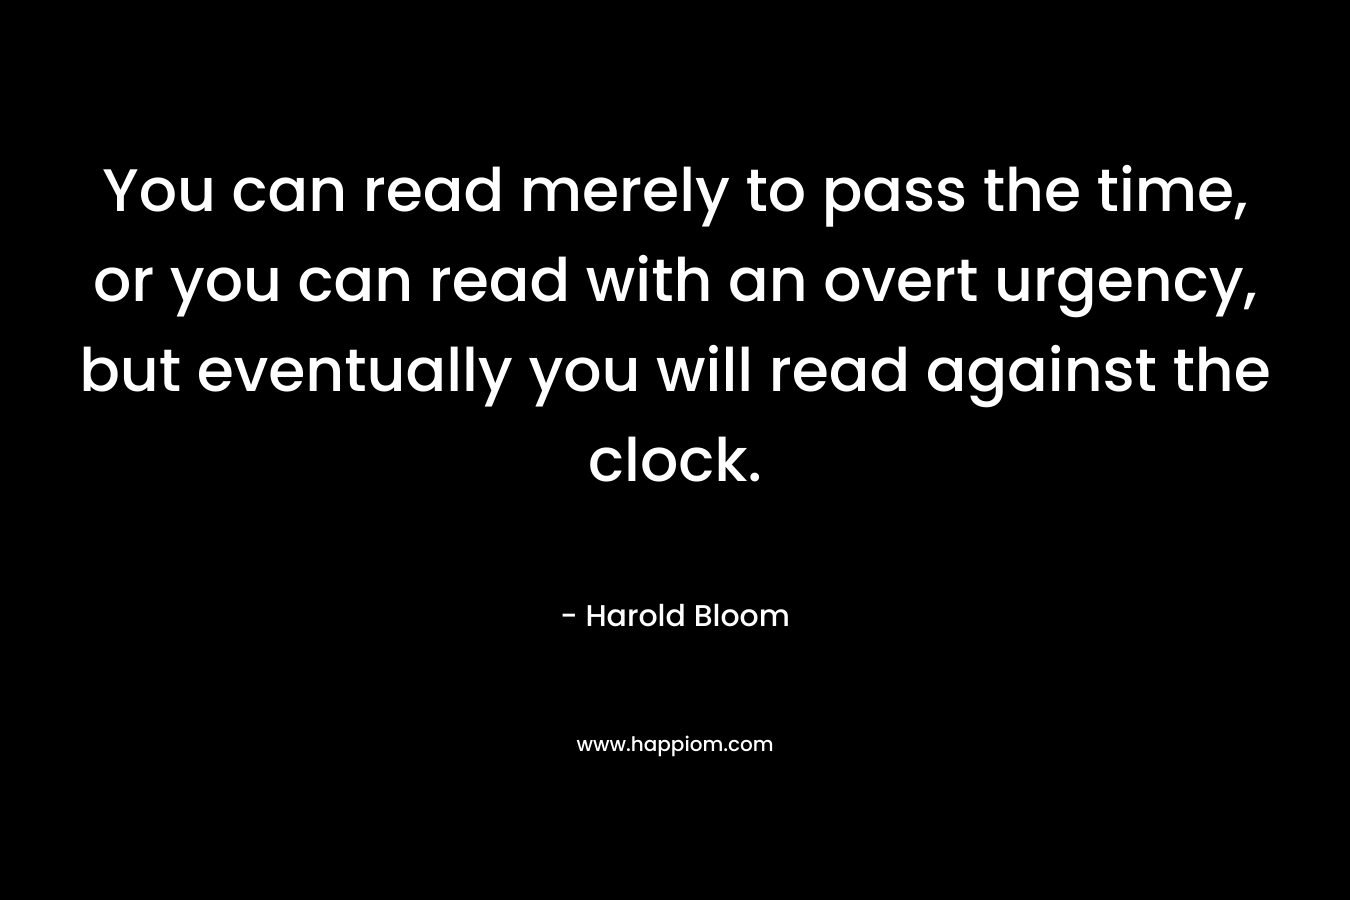 You can read merely to pass the time, or you can read with an overt urgency, but eventually you will read against the clock.